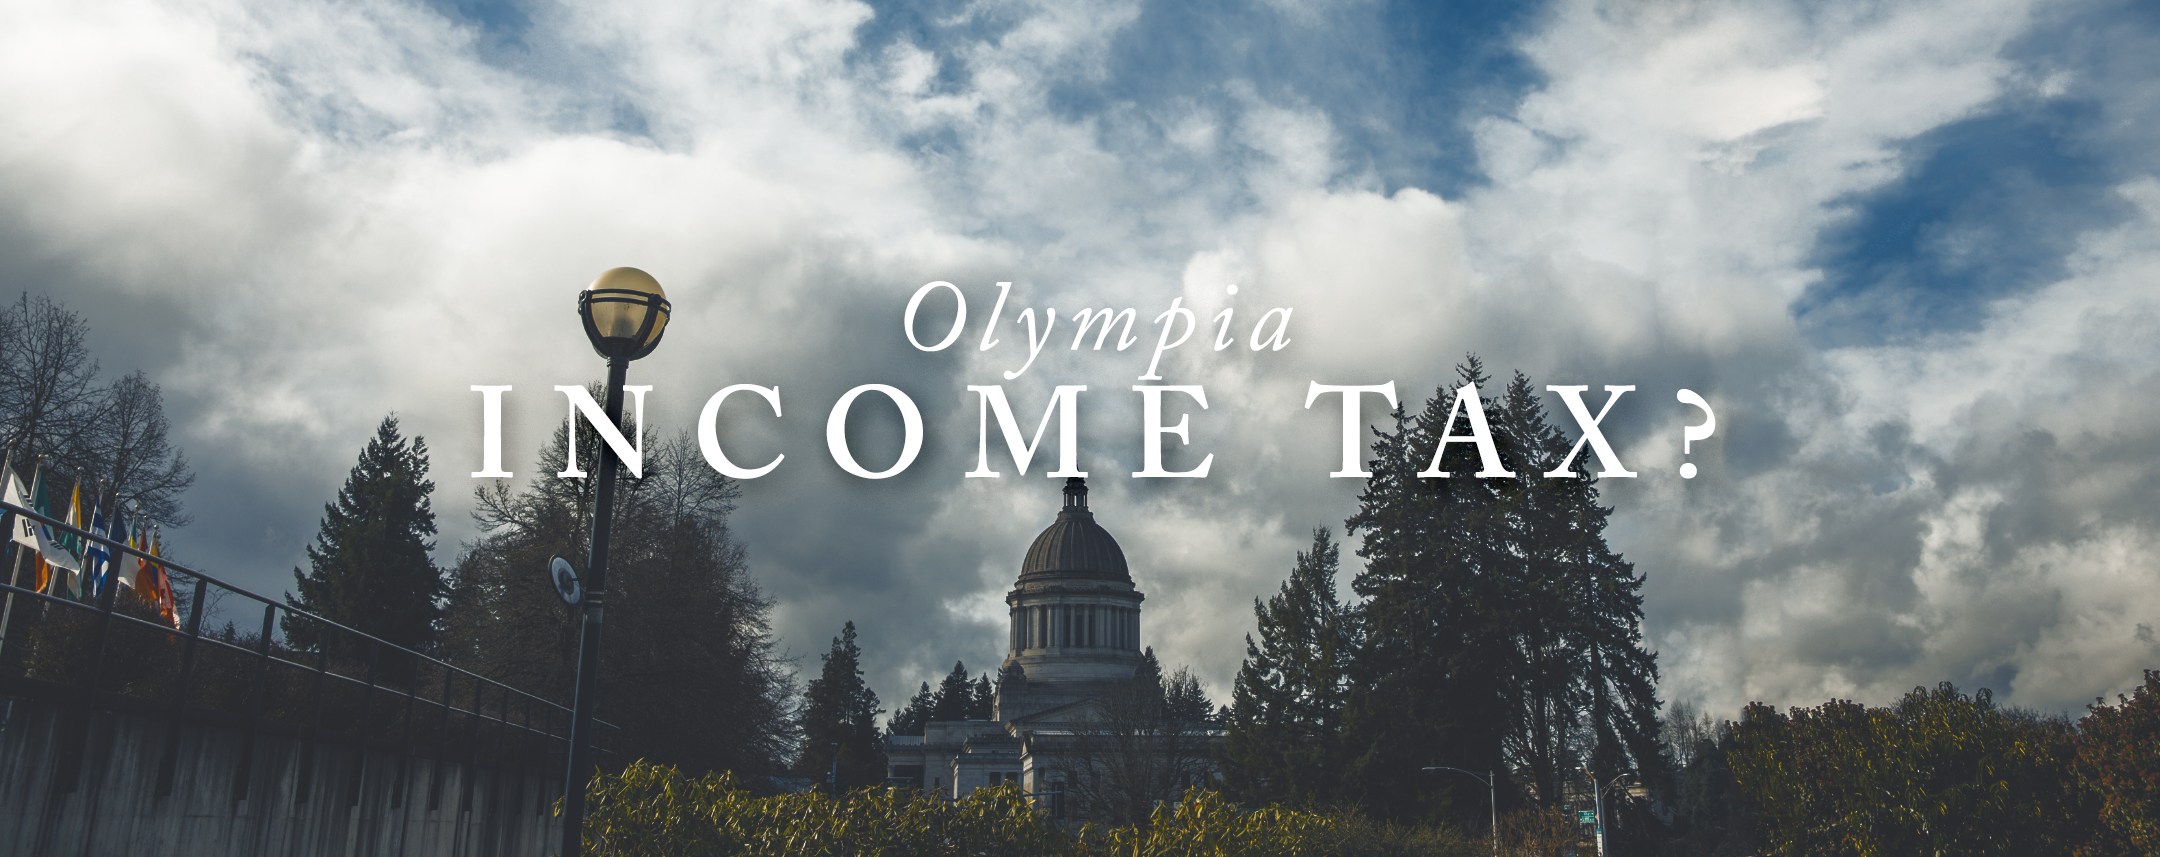 Olympia-income-tax-FEATURED.jpeg